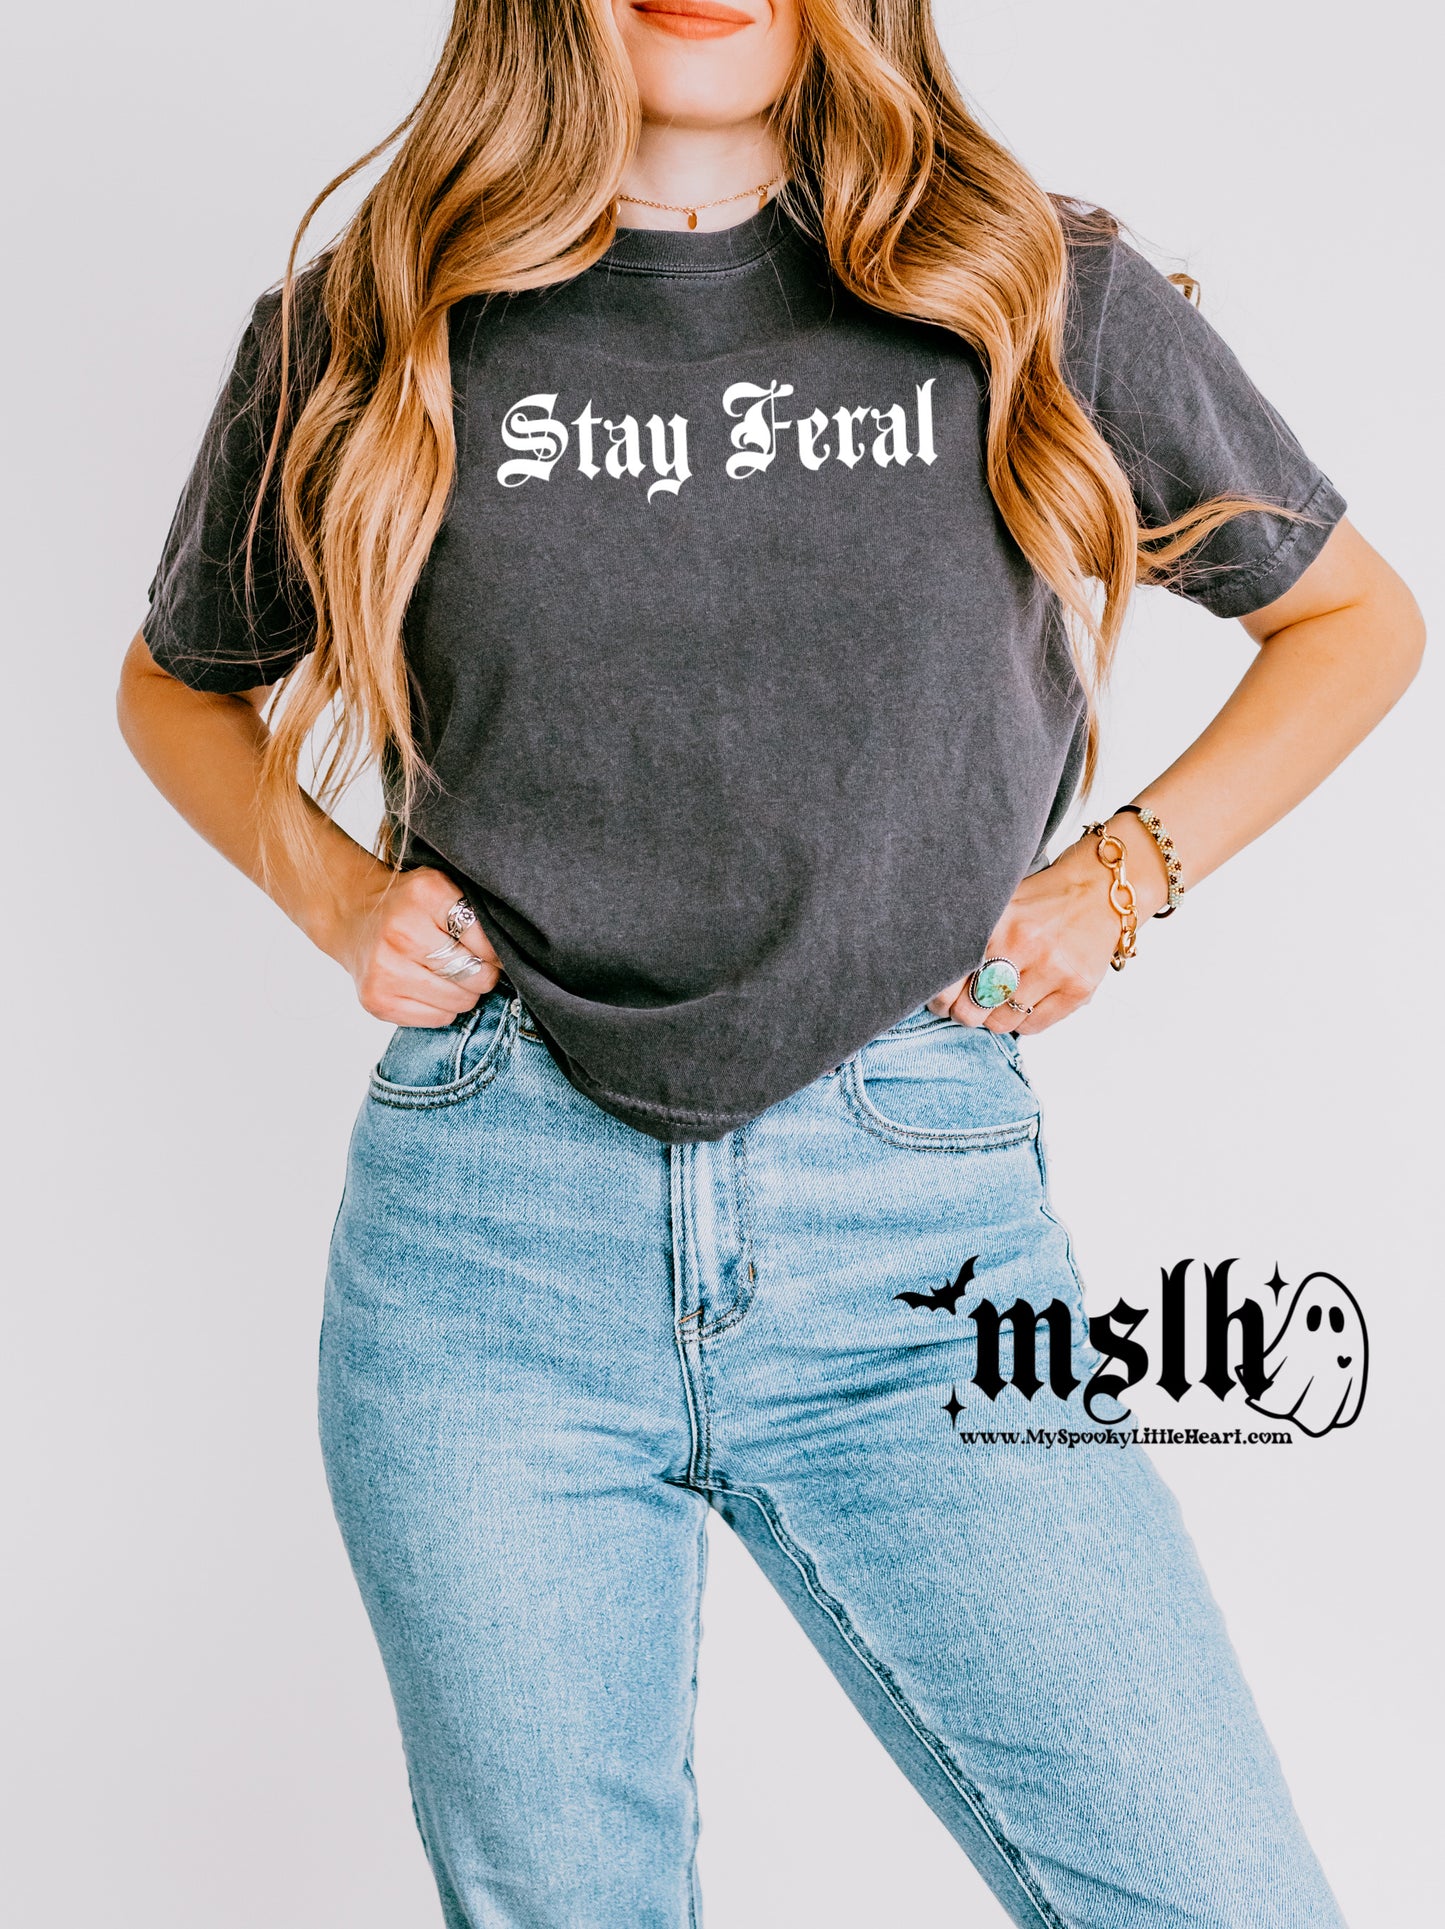 Stay Feral T-Shirt